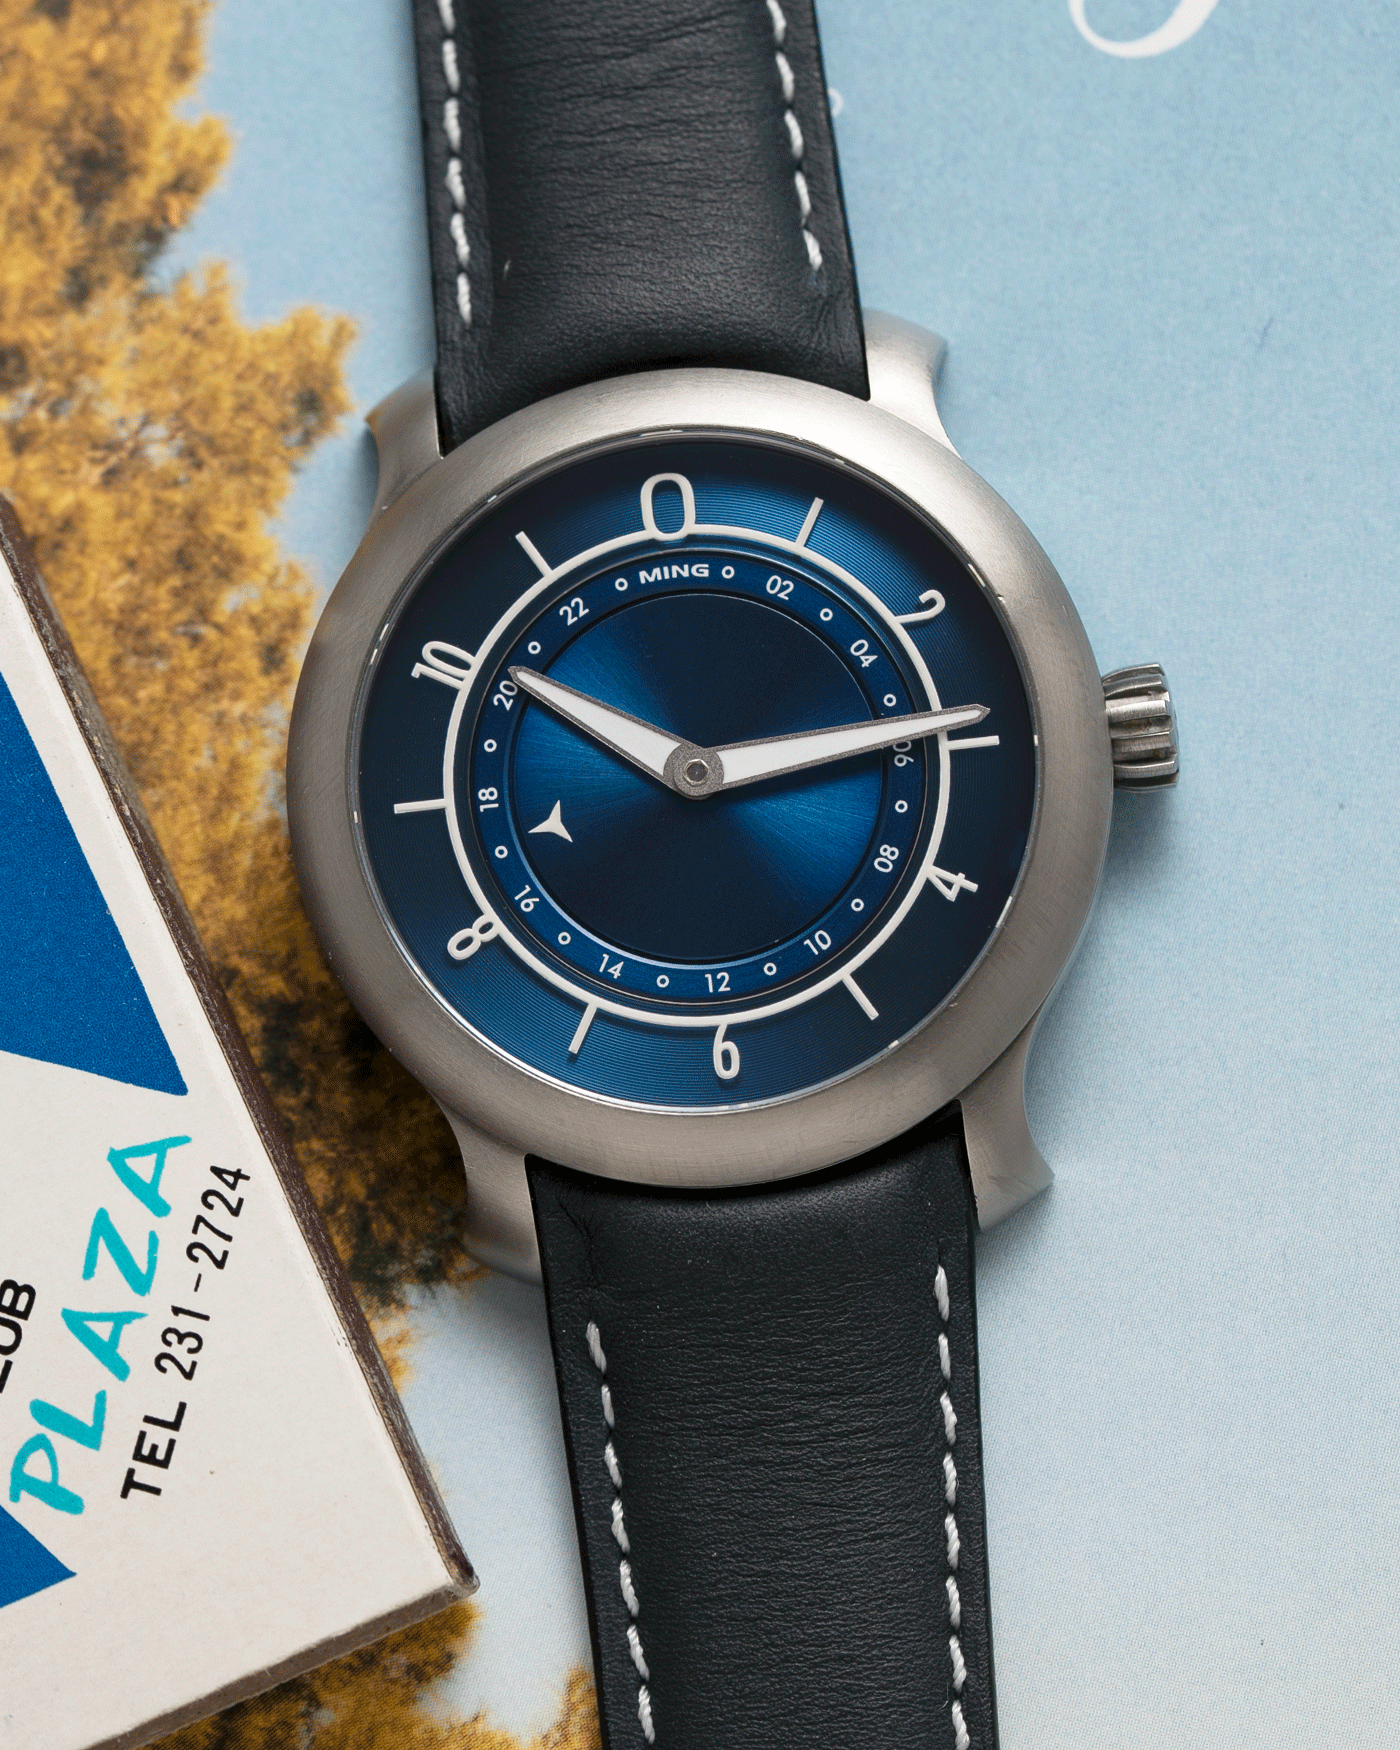 Brand: Ming Year: 2018 Model: 17.03 Material: Grade 2 Titanium Movement: Self-Winding Sellita SW 330-1 Case Diameter: 38mm Strap: Jean Rousseau Blue Grey Smooth Calf for MING